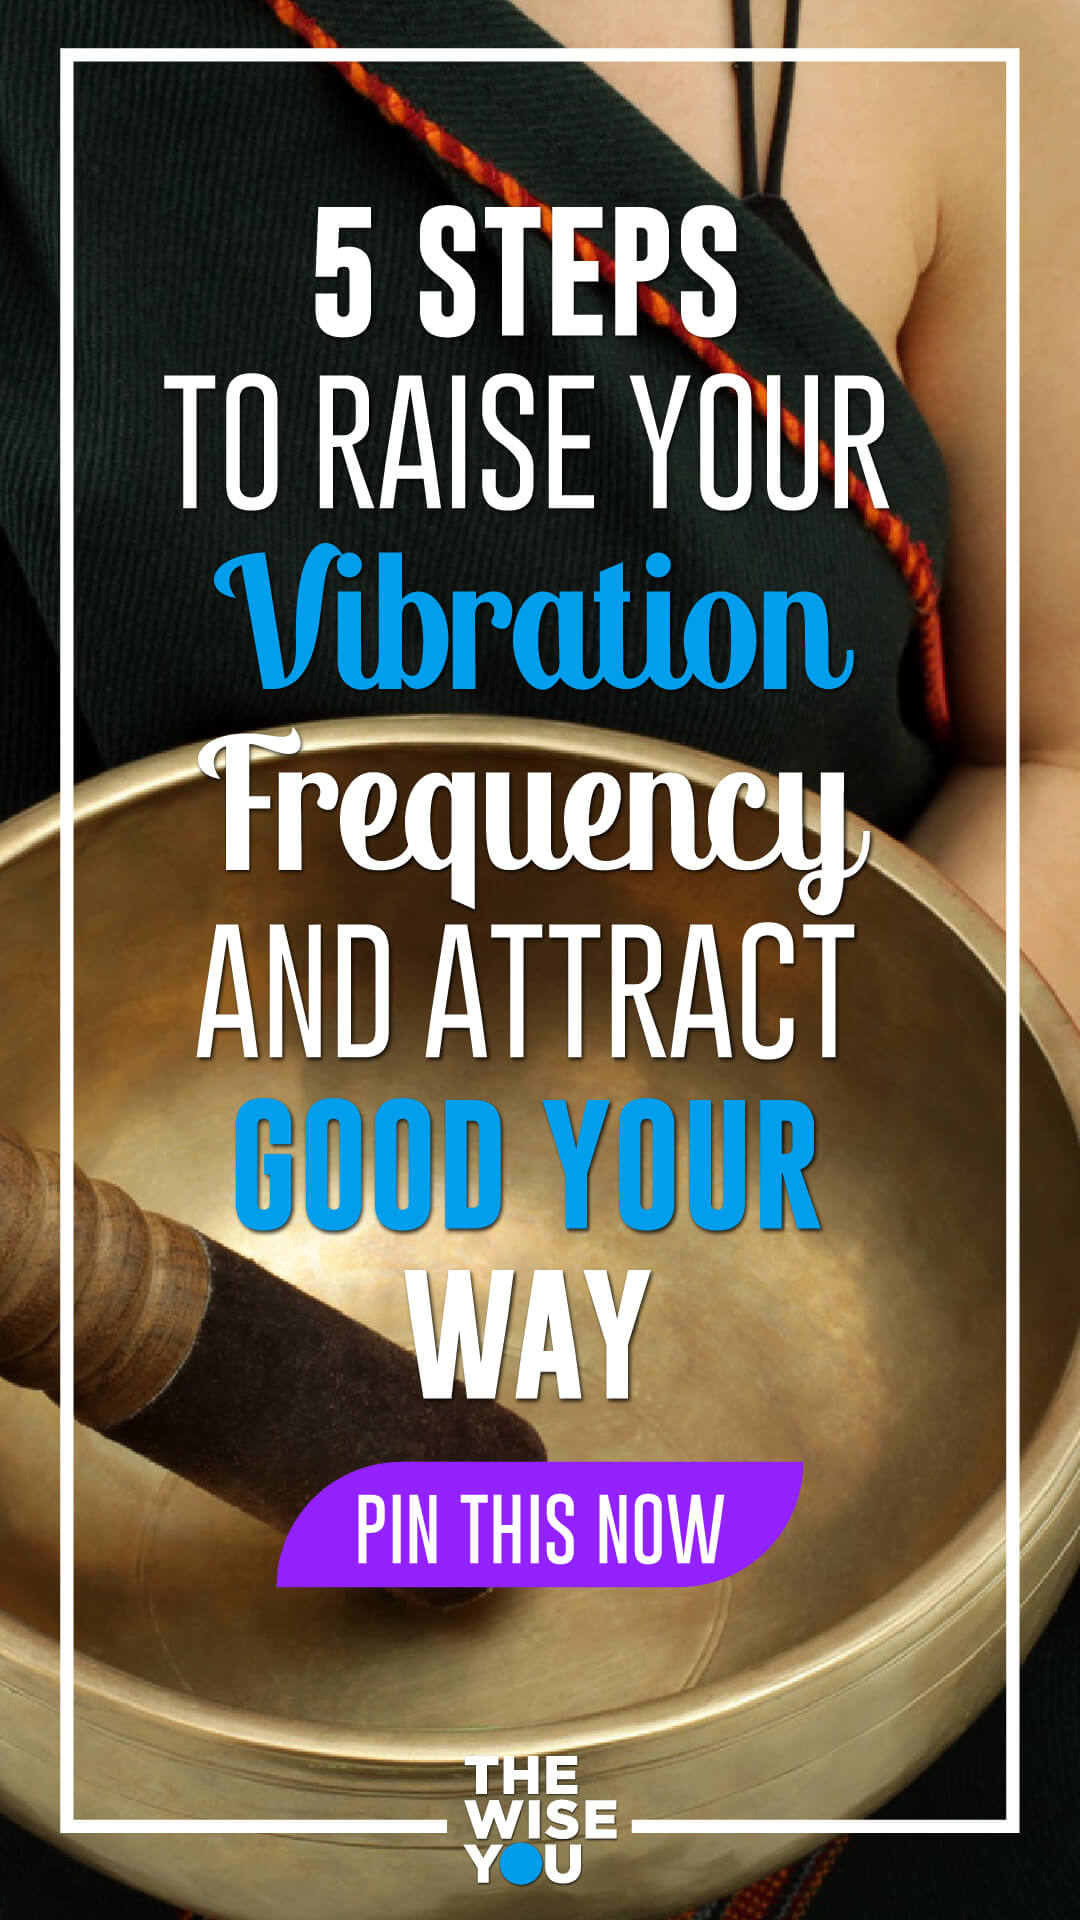 5 Steps to Raise Your Vibration Frequency and Attract Good Your Way